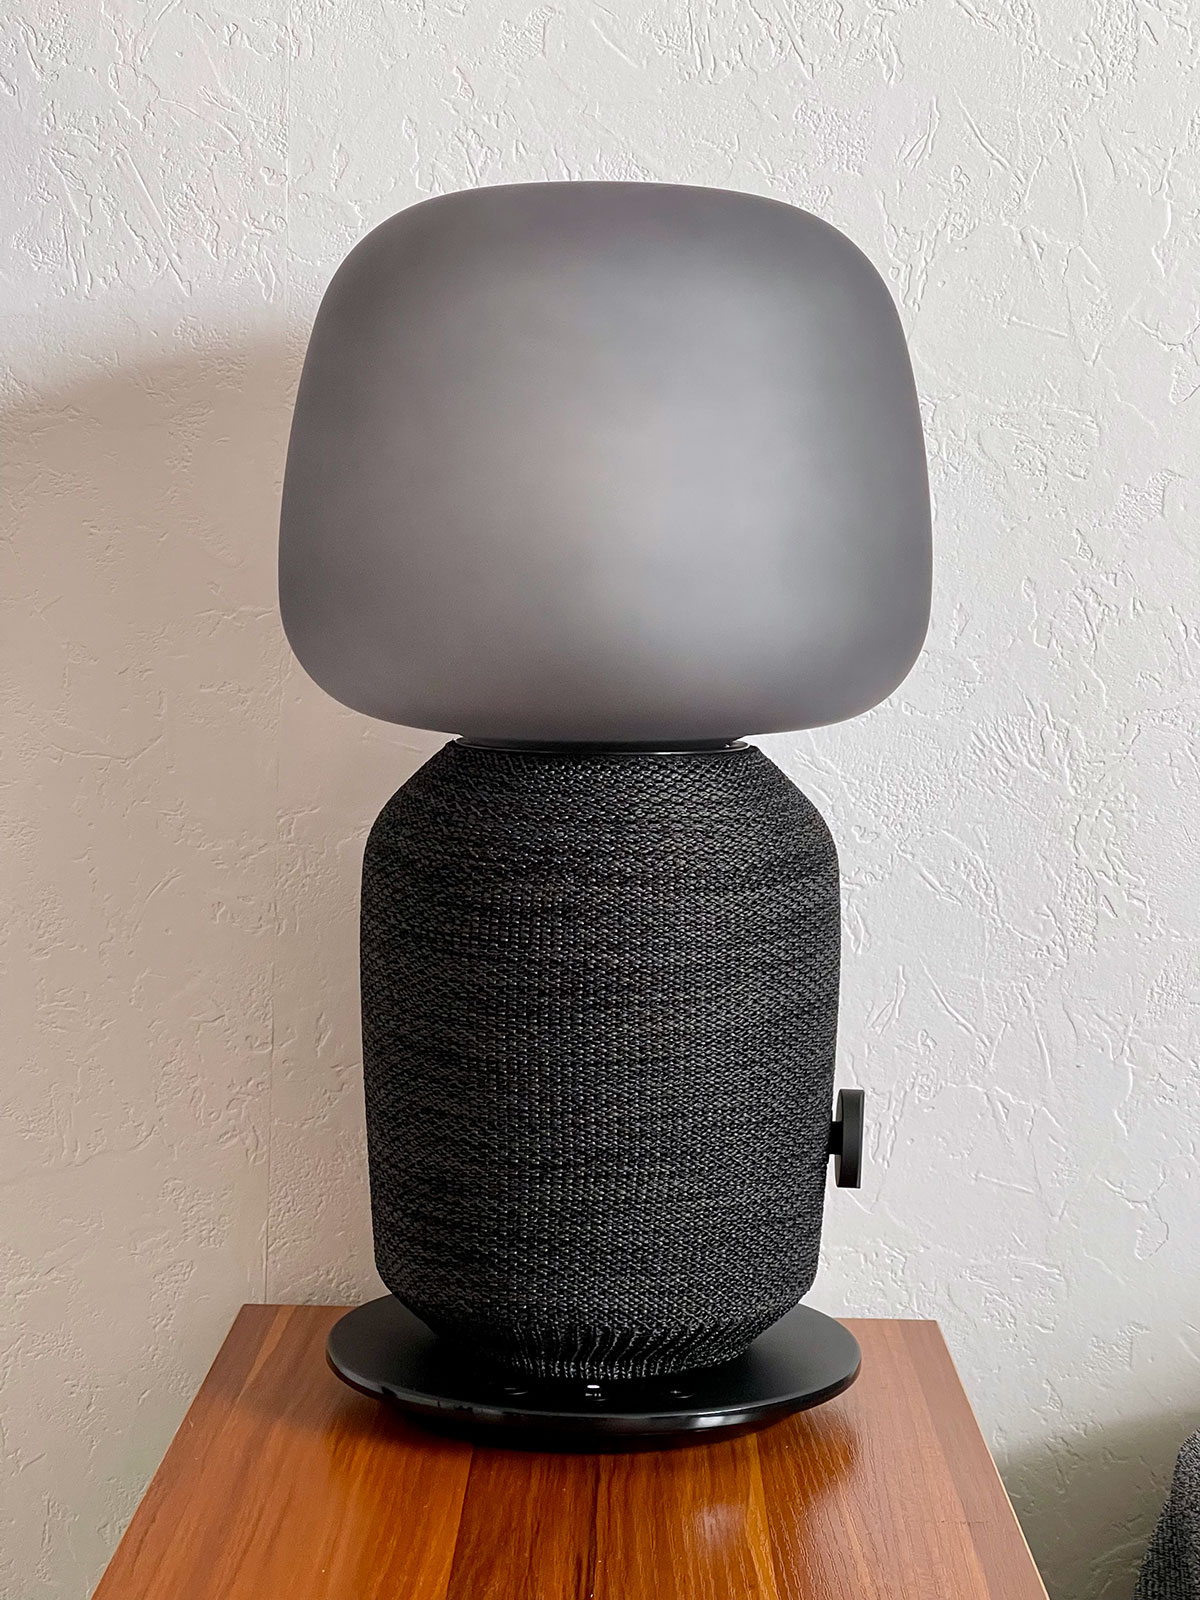 Gadget Review] IKEA SYMFONISK Table Lamp レビュー – IKEAと